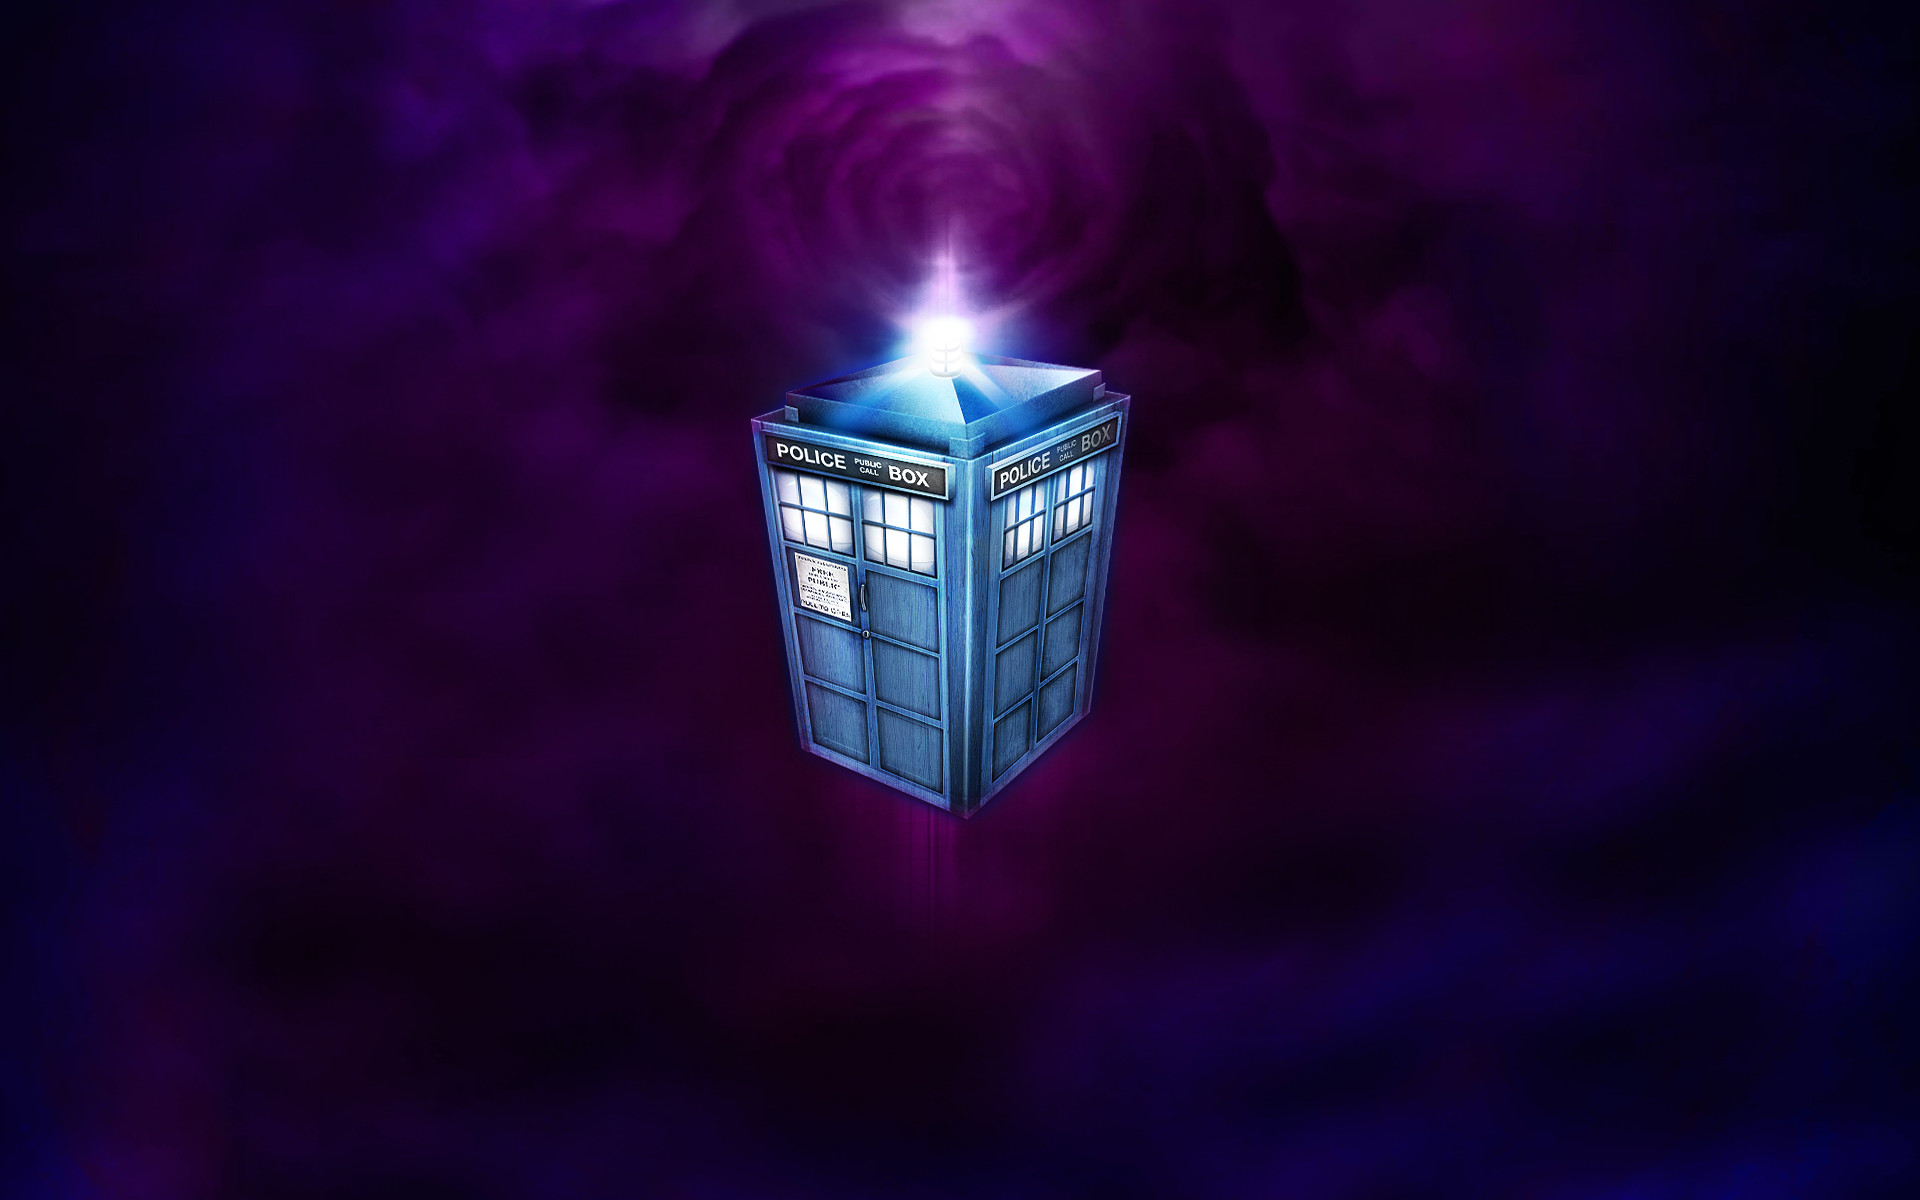 Michael Flarup Doctor Who Tardis Wallpaper.png over 2 years ago 2866 .